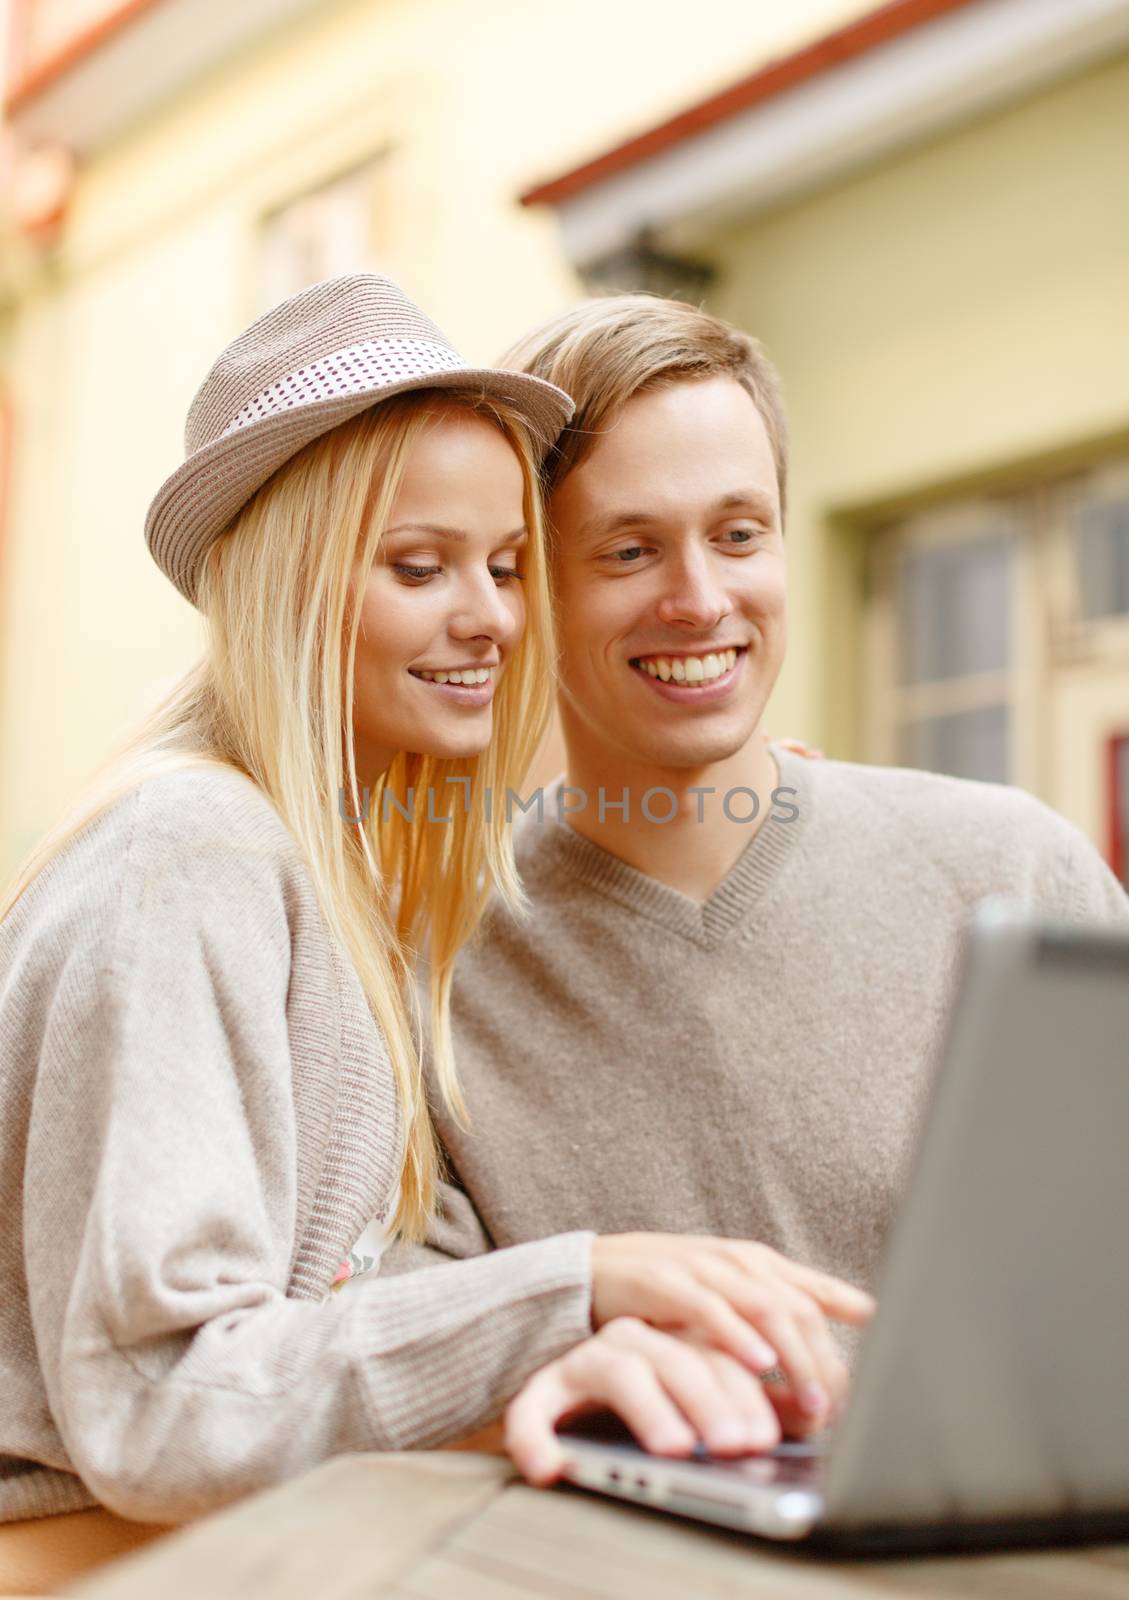 summer holidays, city, dating and technology concept - smiling couple with laptop computer in cafe